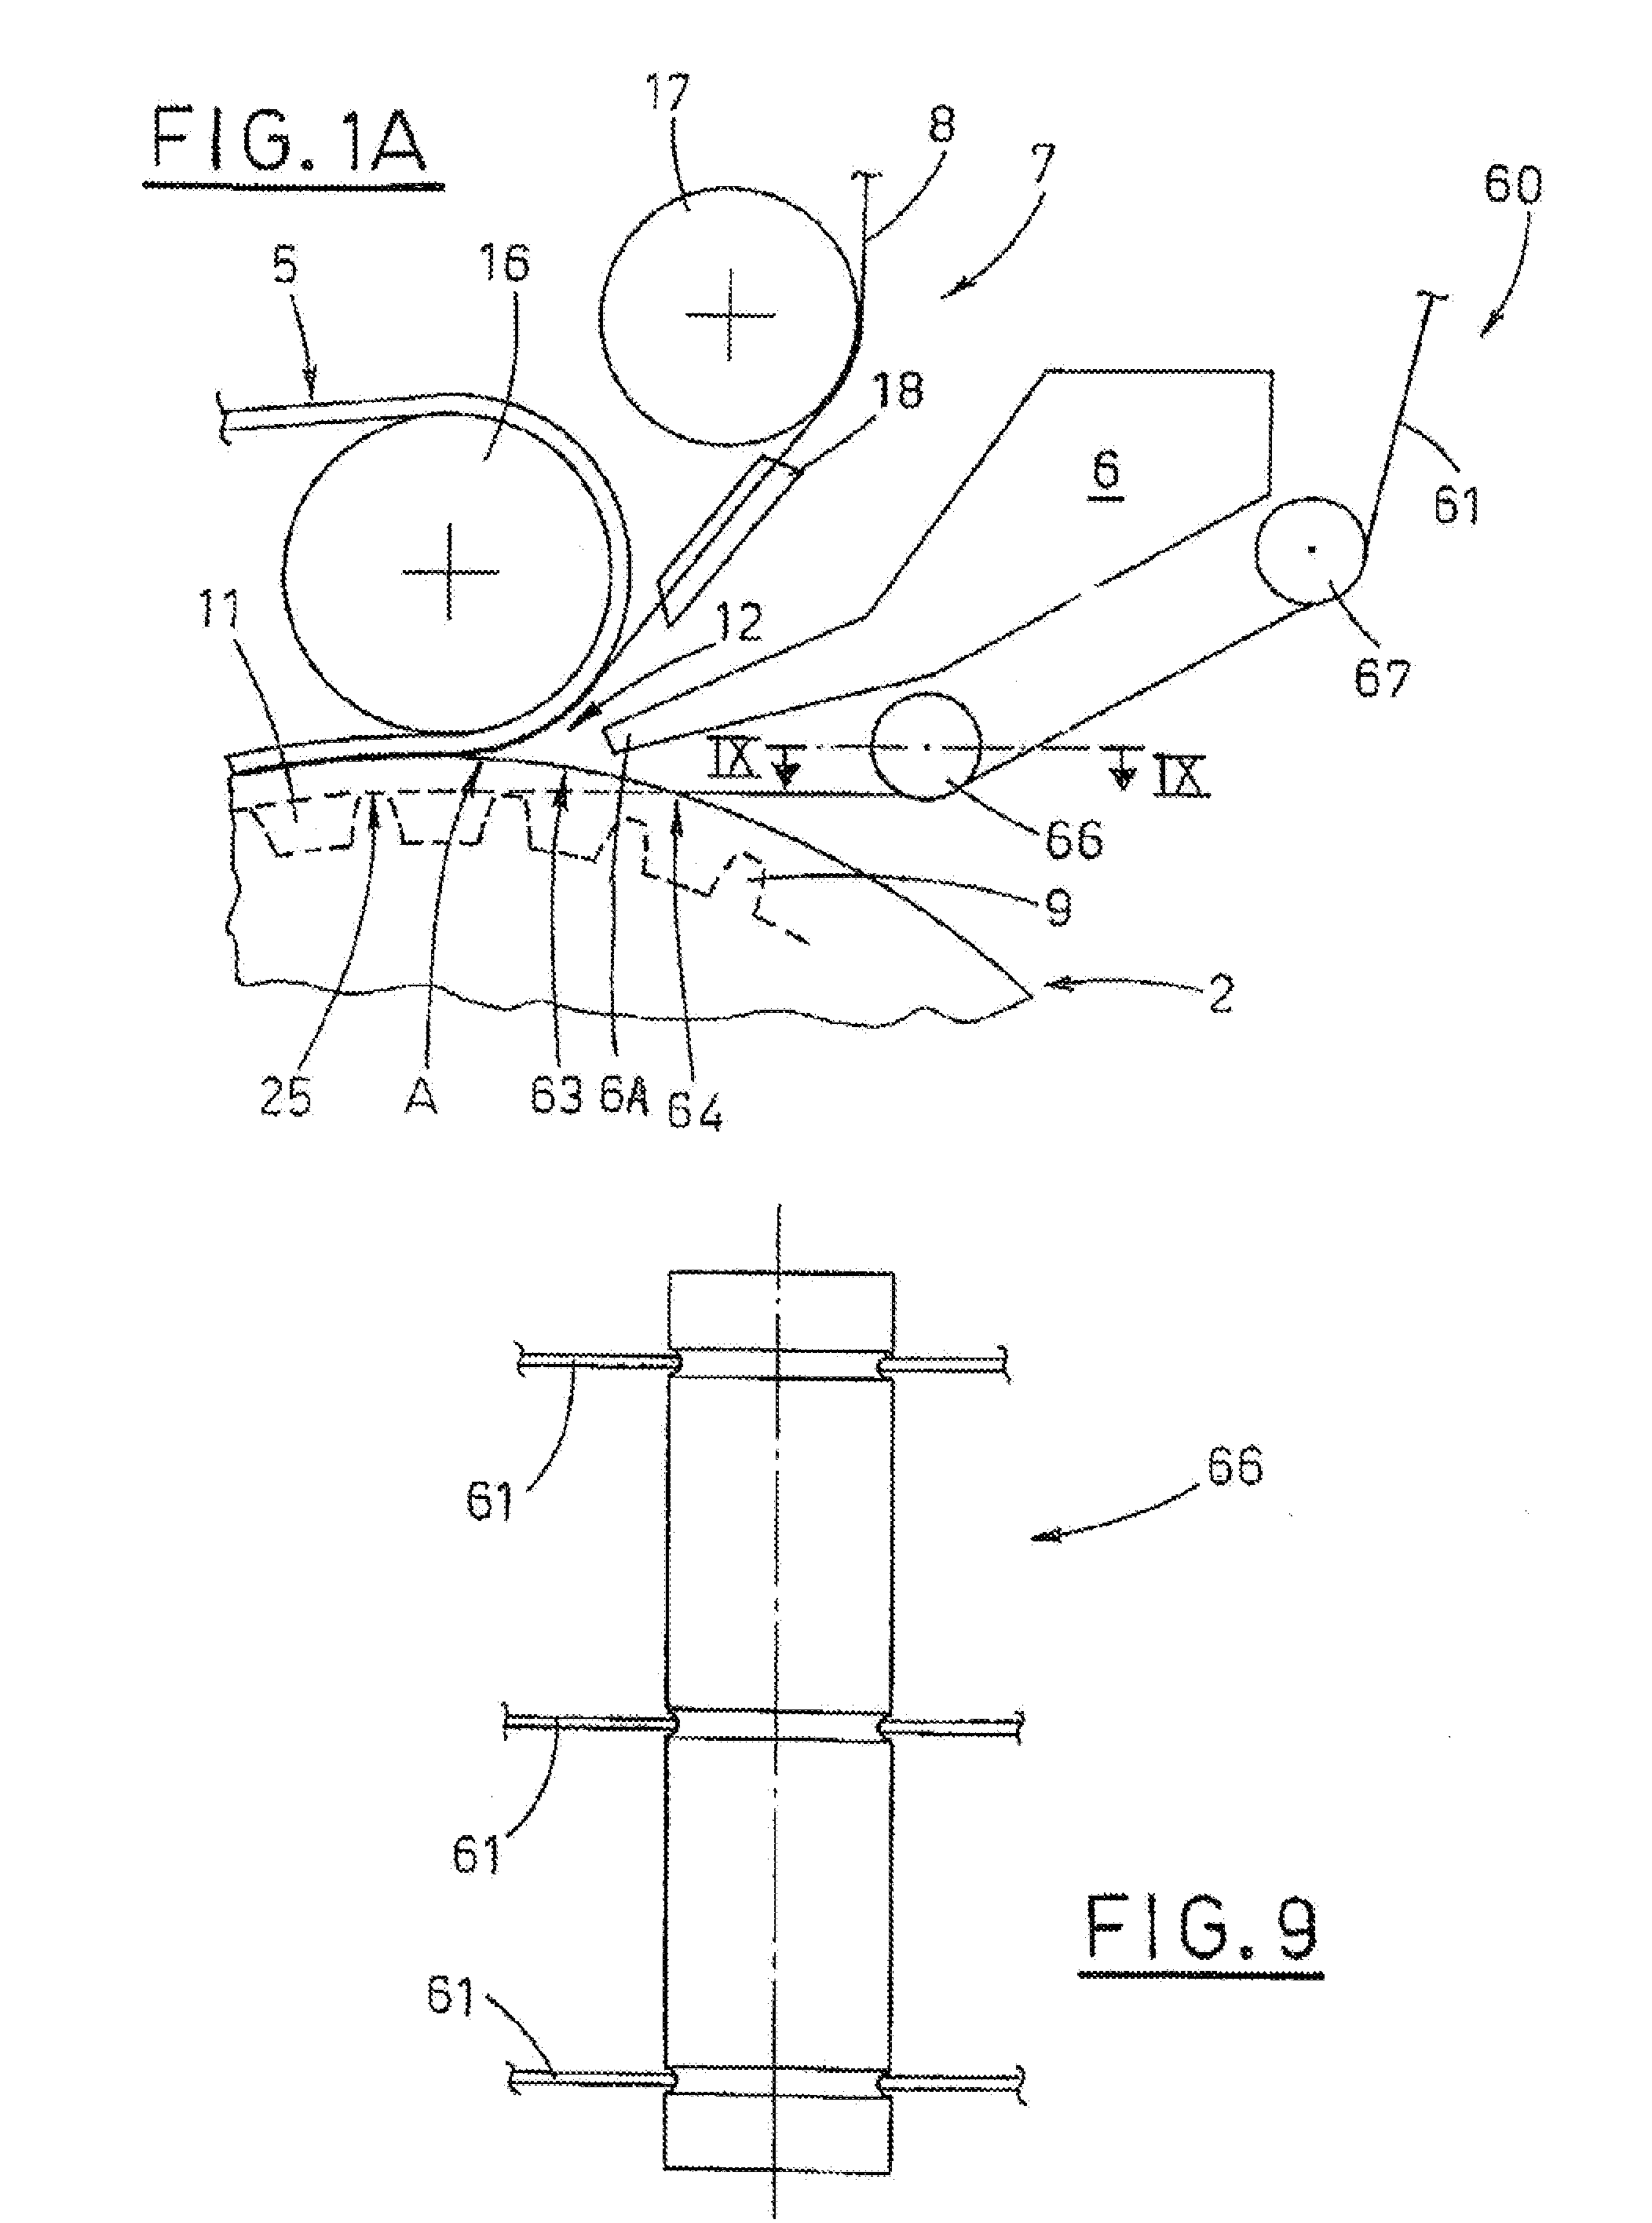 Cogged belt for conveying articles and/or for power transmission, and a method and an apparatus for realising the cogged belt